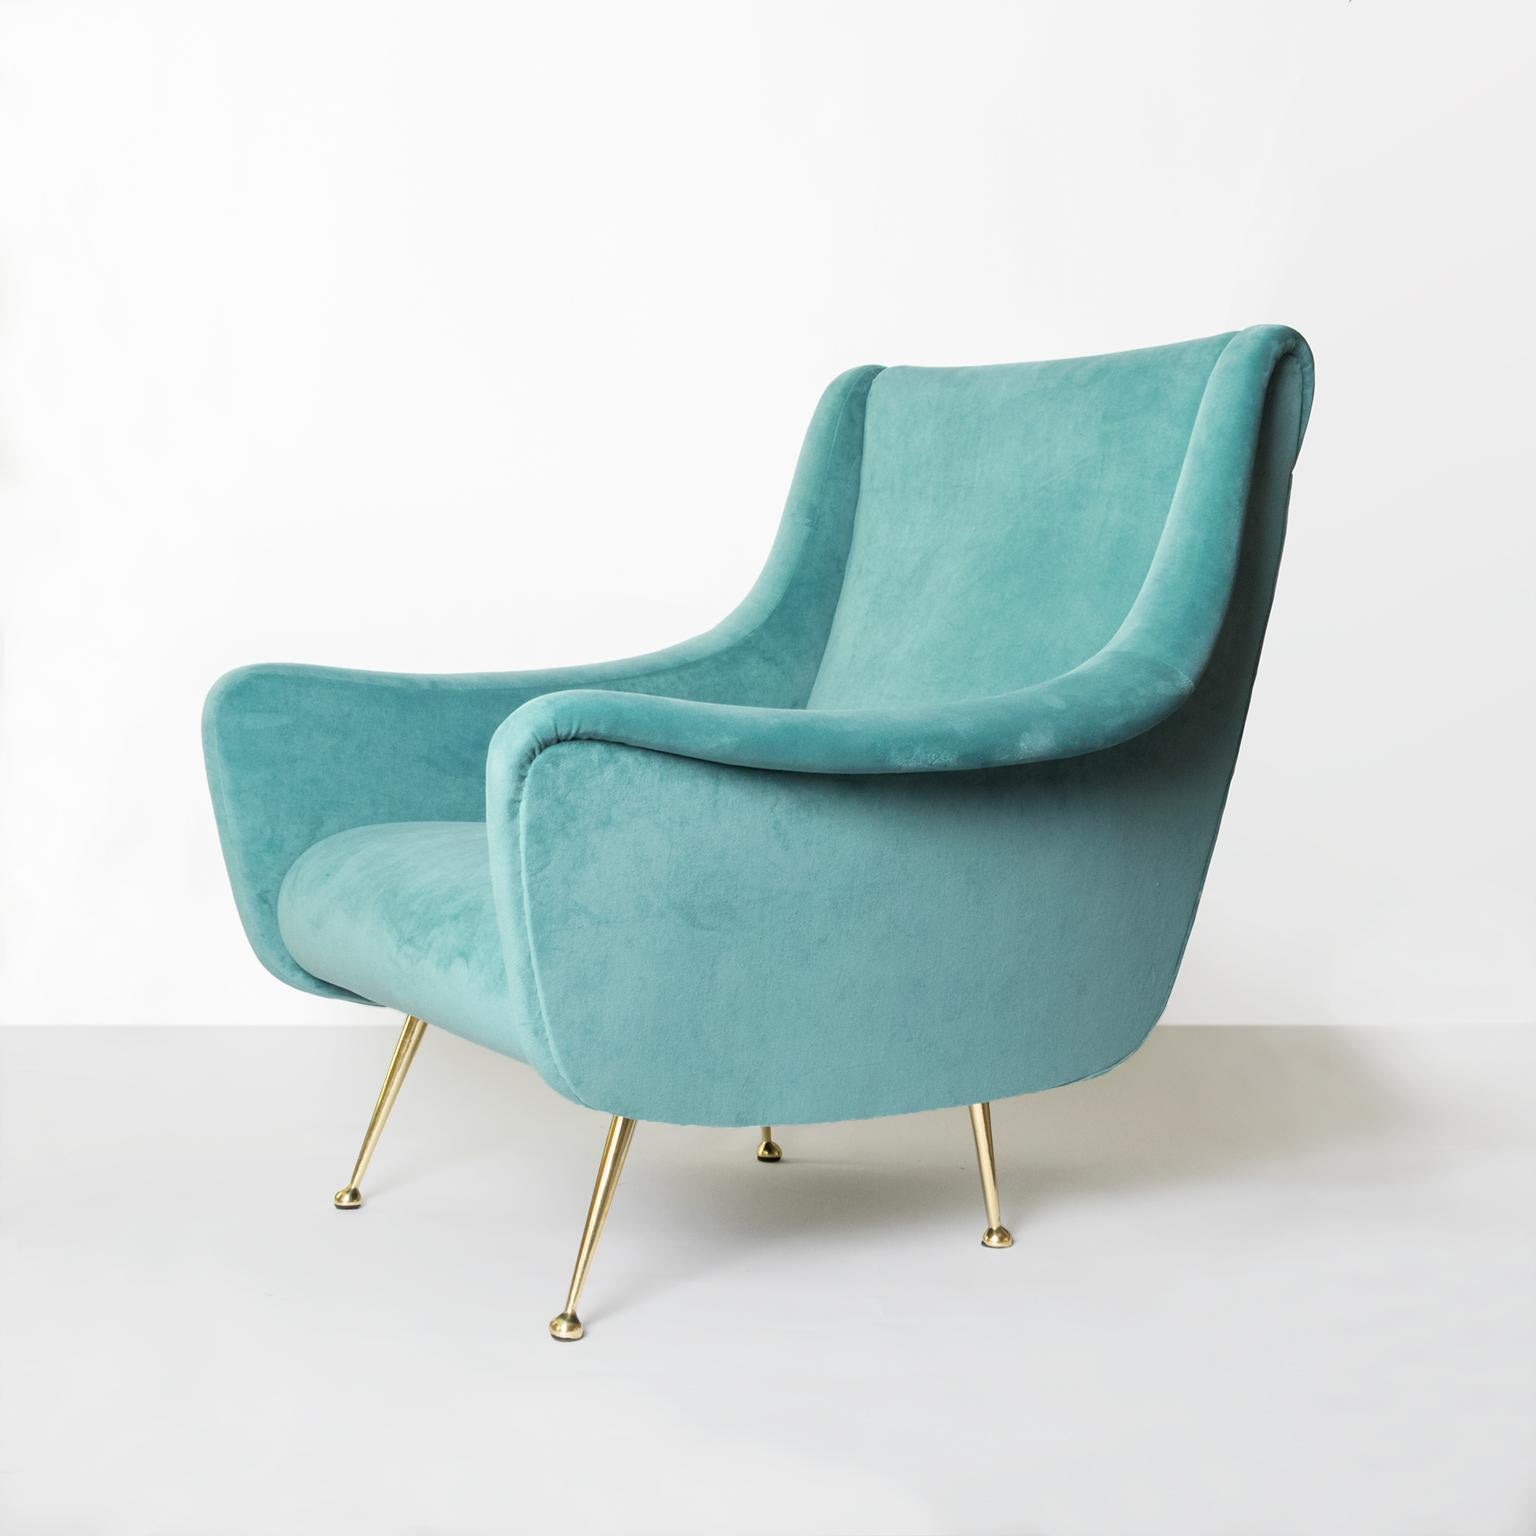 A Midcentury Modern lounge chair newly restored and reupholstered in blue-green velvet. The newly polished legs are solid brass. Made by Lenzi has original metal label.
 
Measures: Height: 33